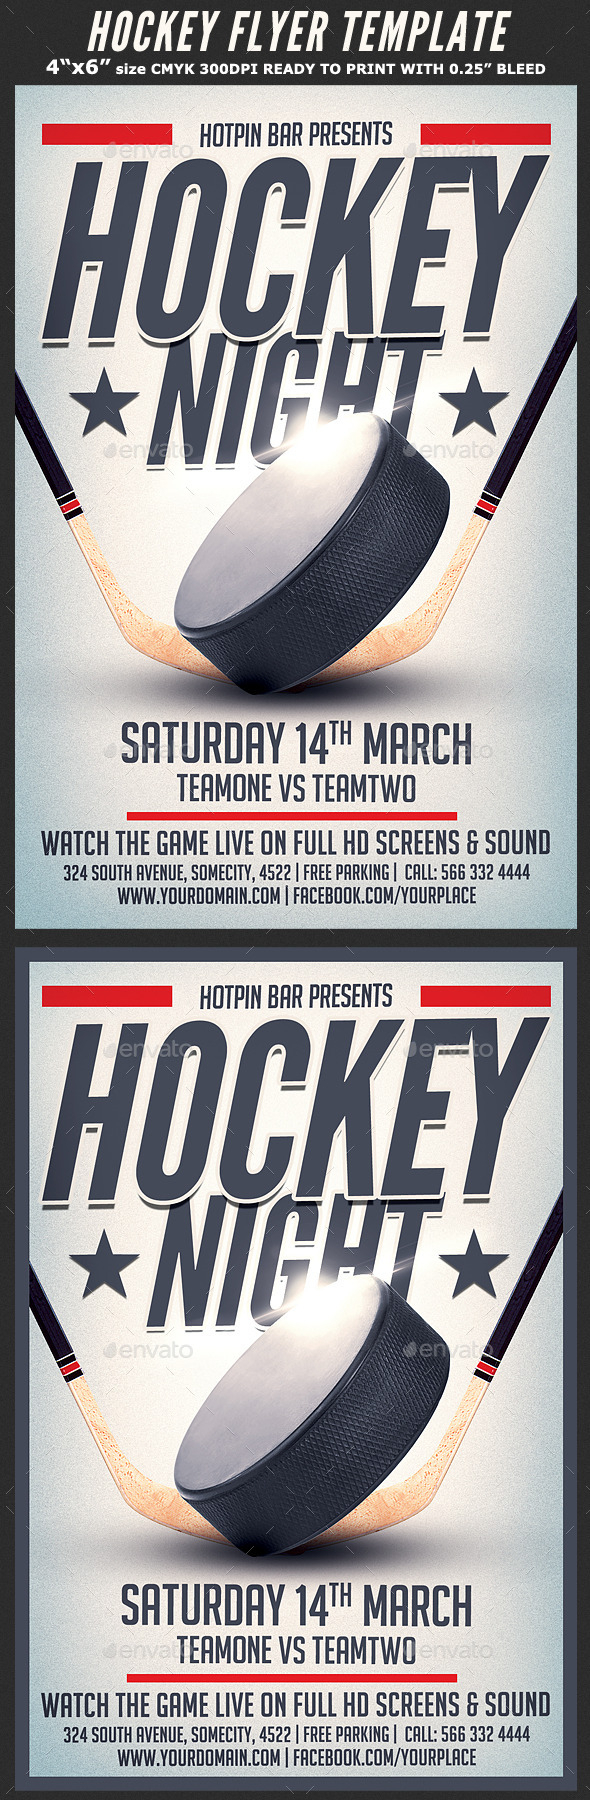 Hockey Flyer Graphics, Designs & Templates From Graphicriver Inside Hockey Flyer Template